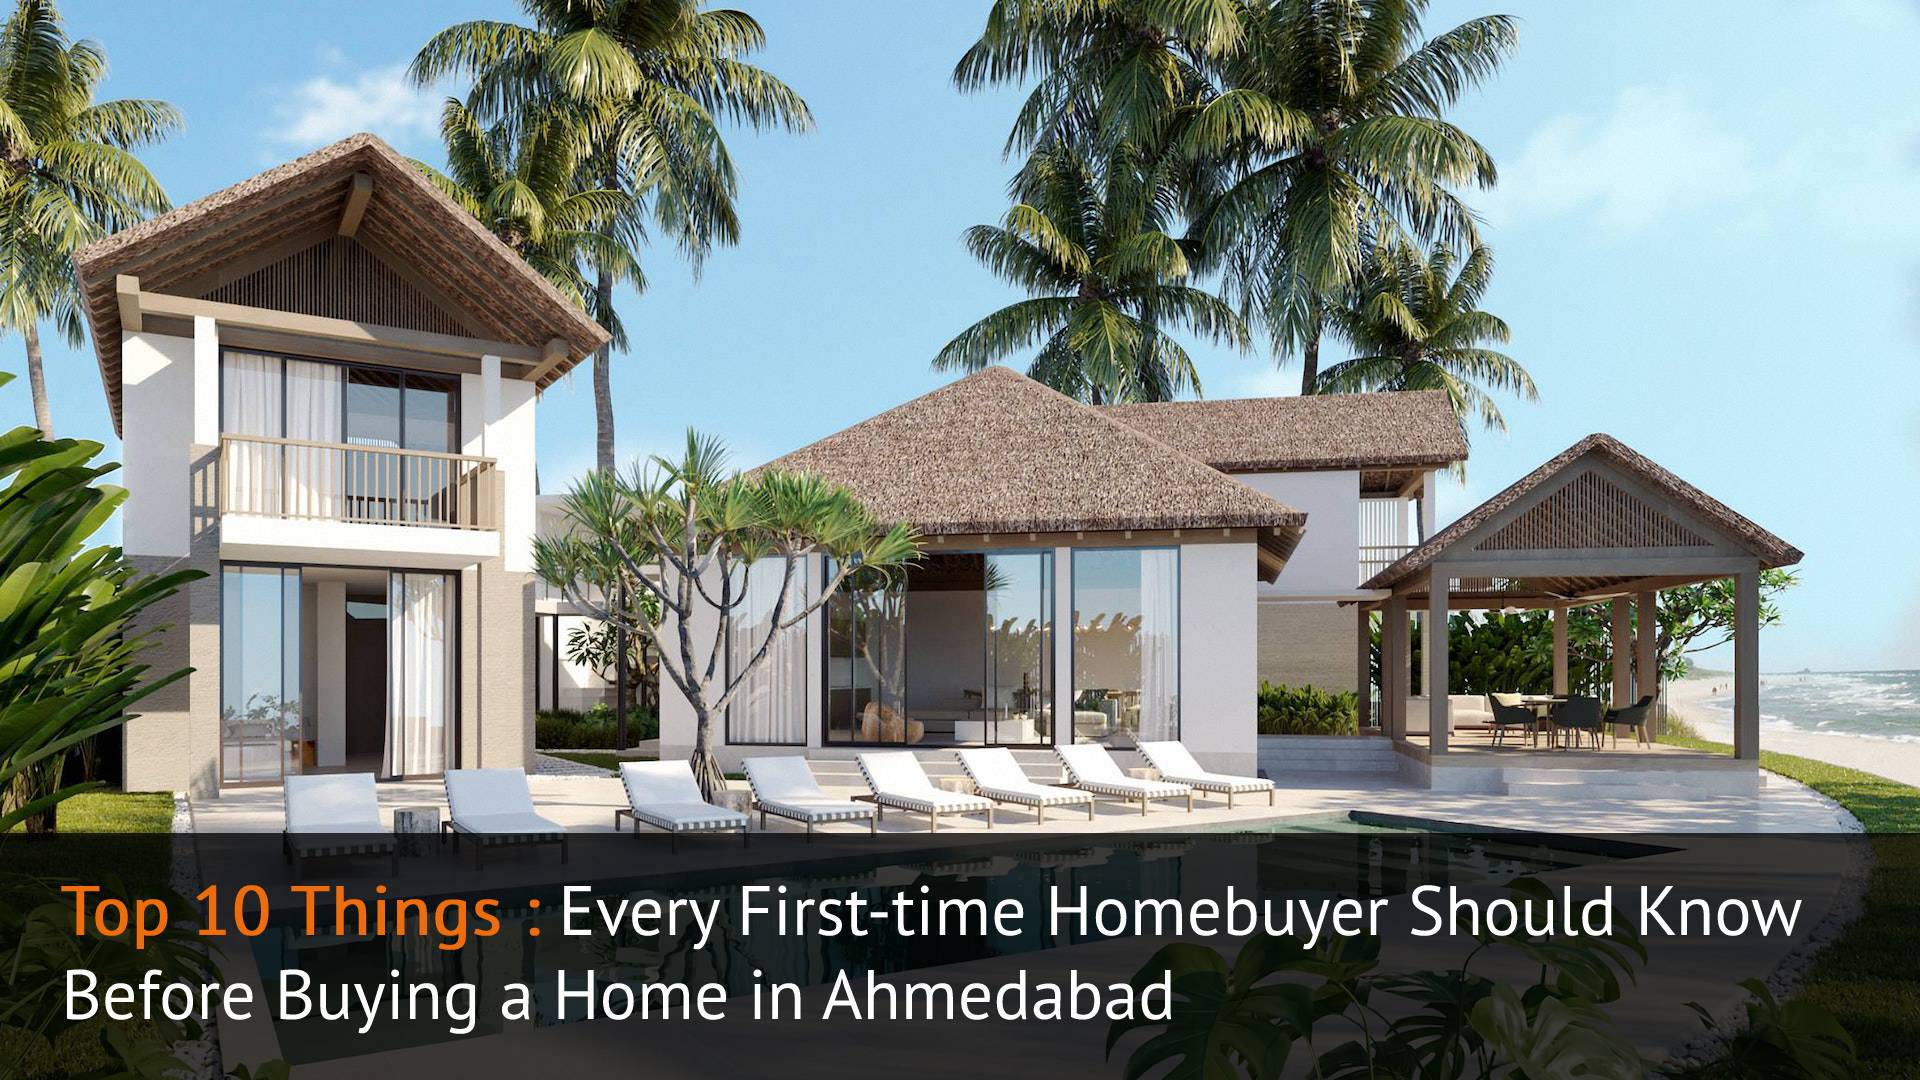 Top 10 Things Every First-time Homebuyer Should Know Before Buying a Home in Ahmedabad - KACS